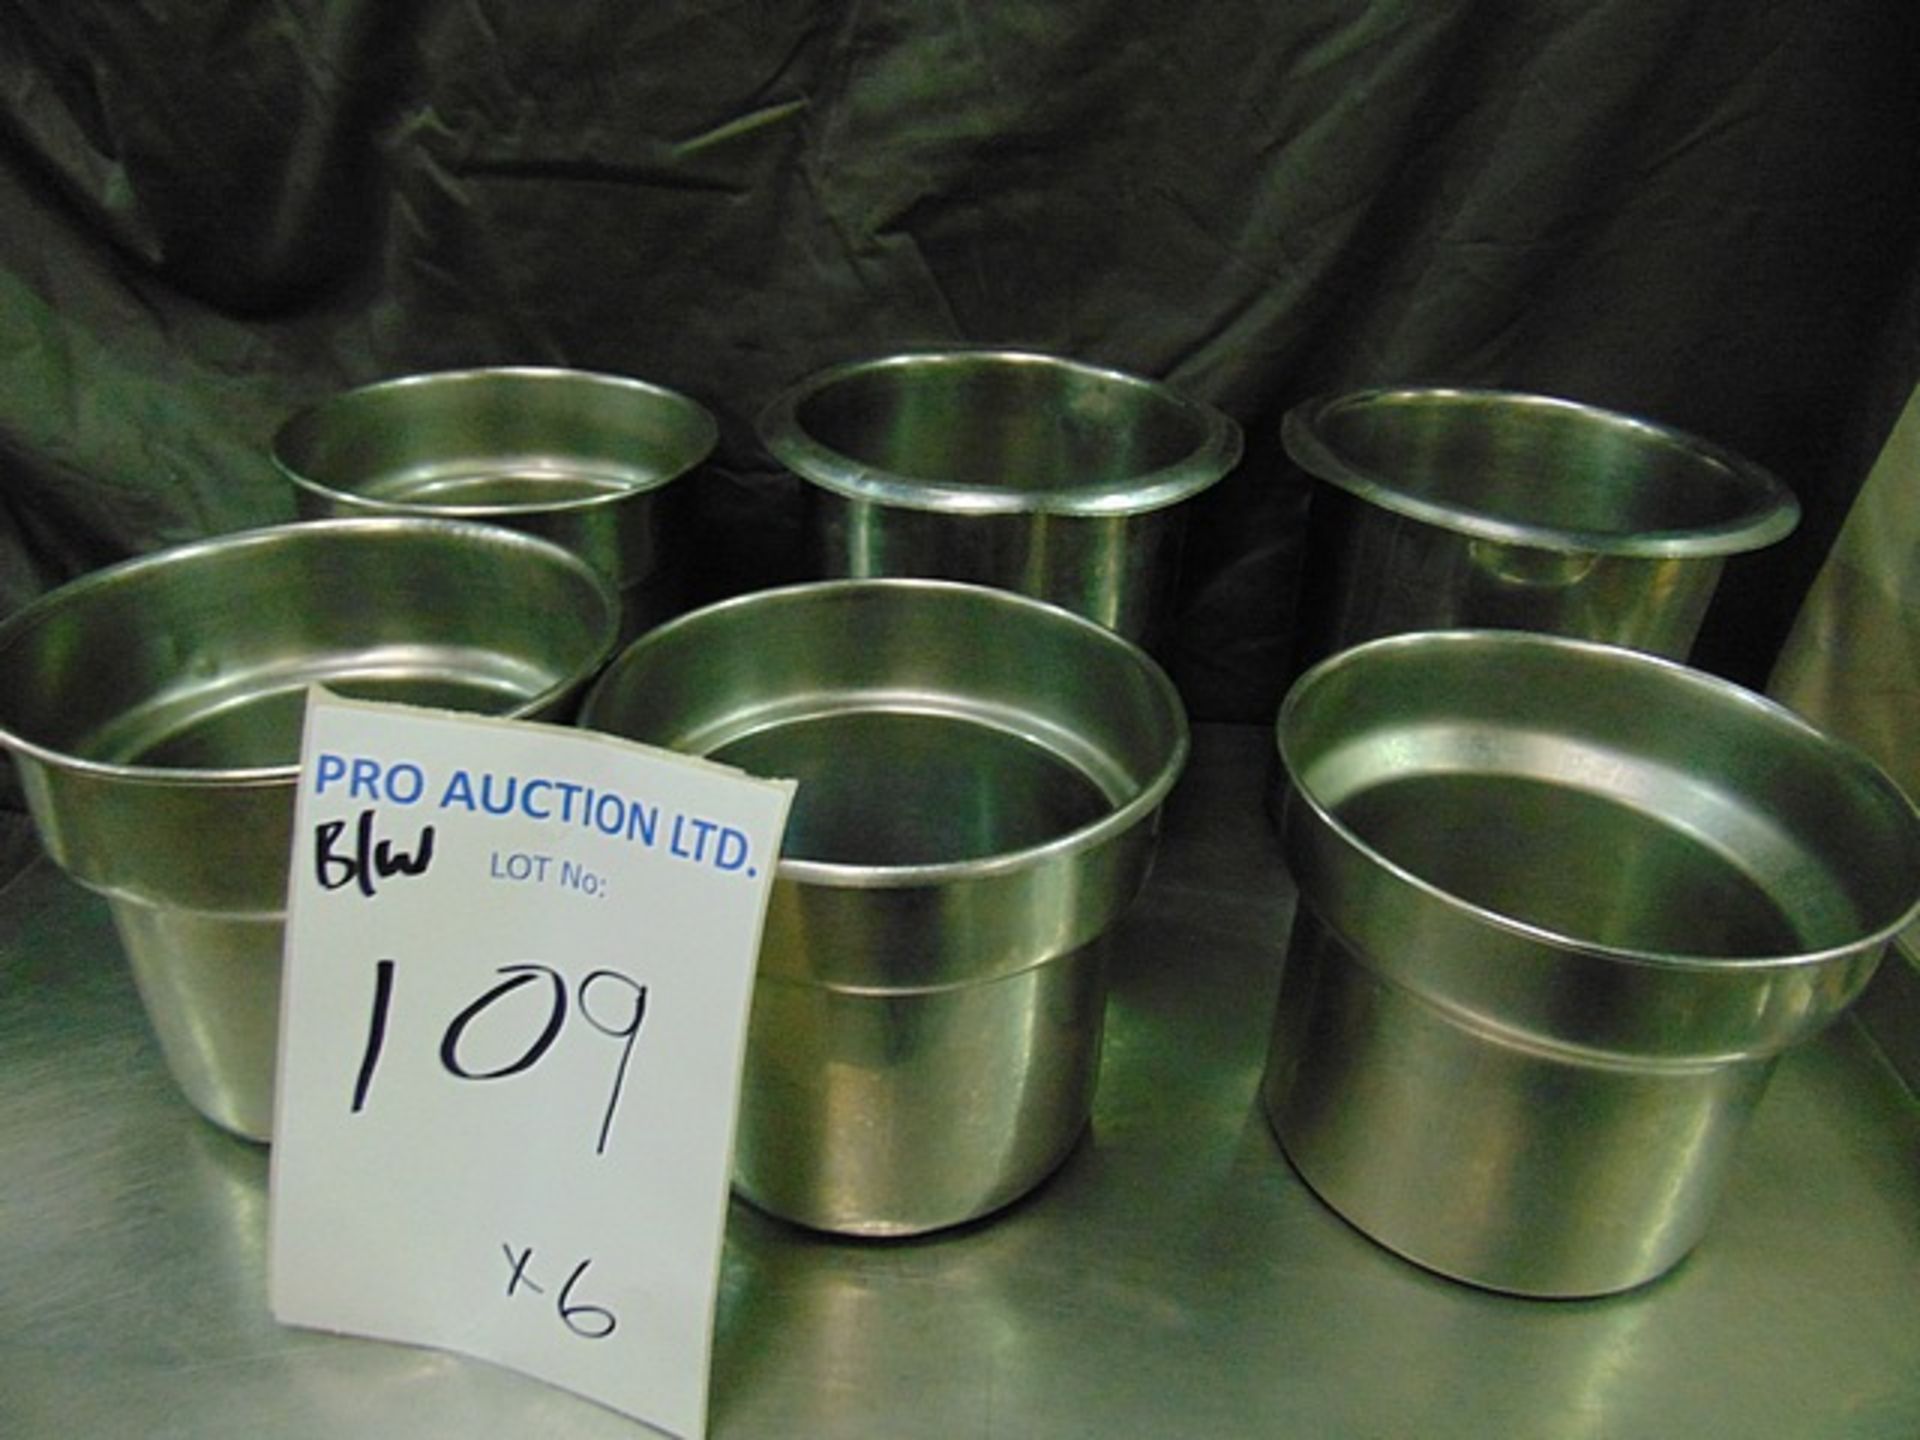 6 x stainless steel soup/pea/carry/bain marie pots